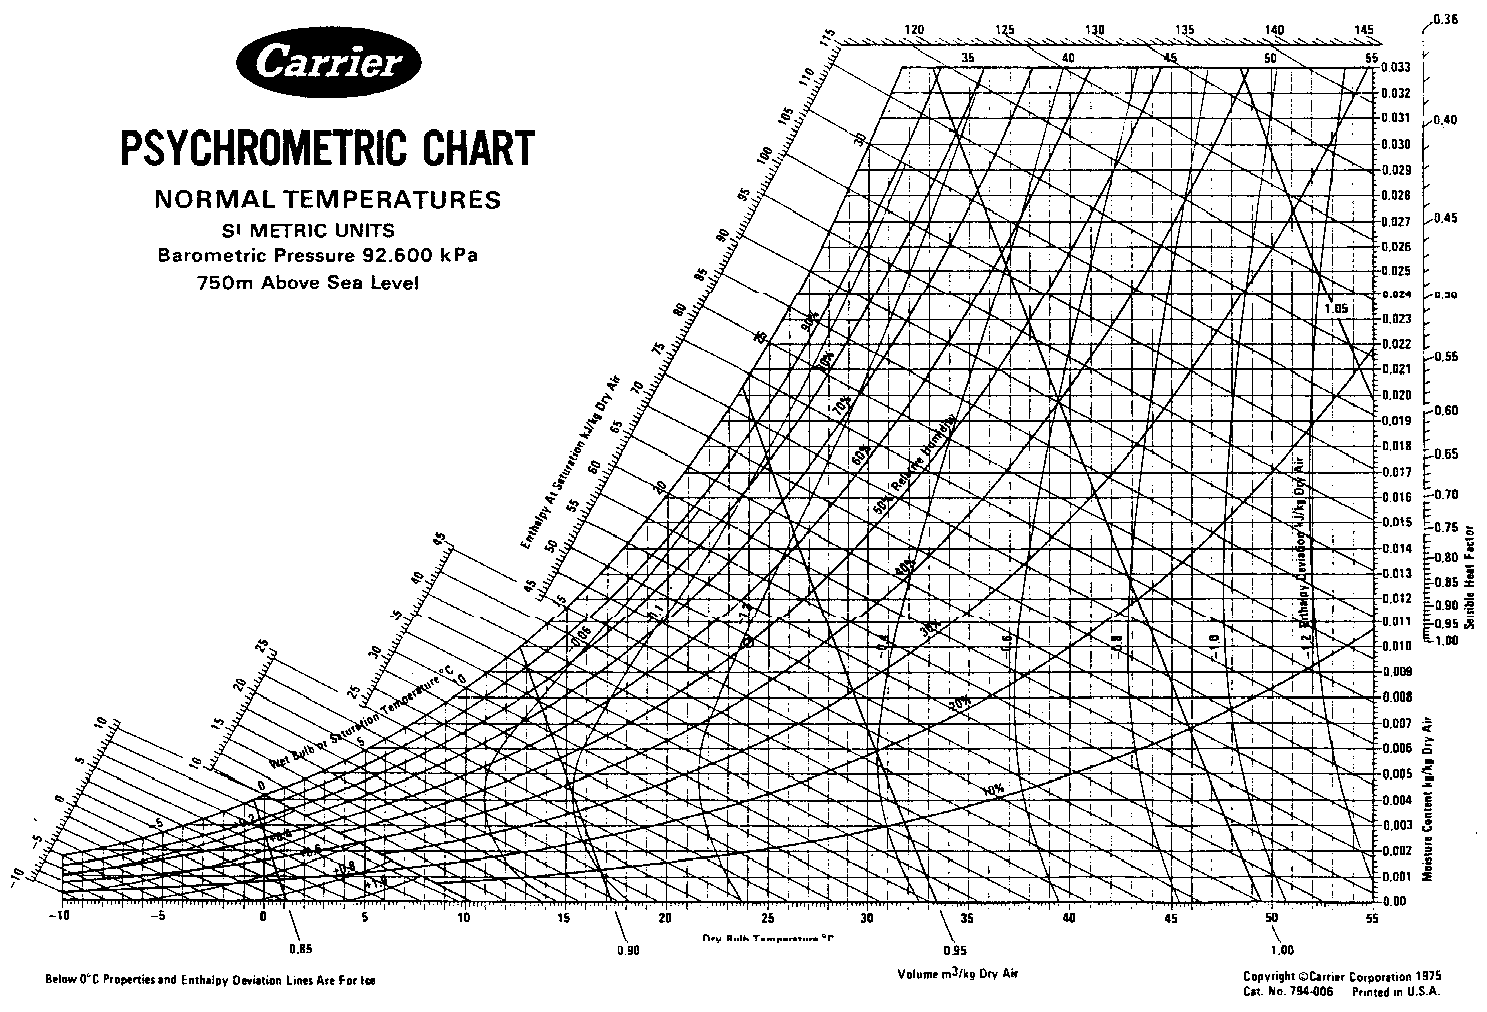 carrier psychrometric chart answers